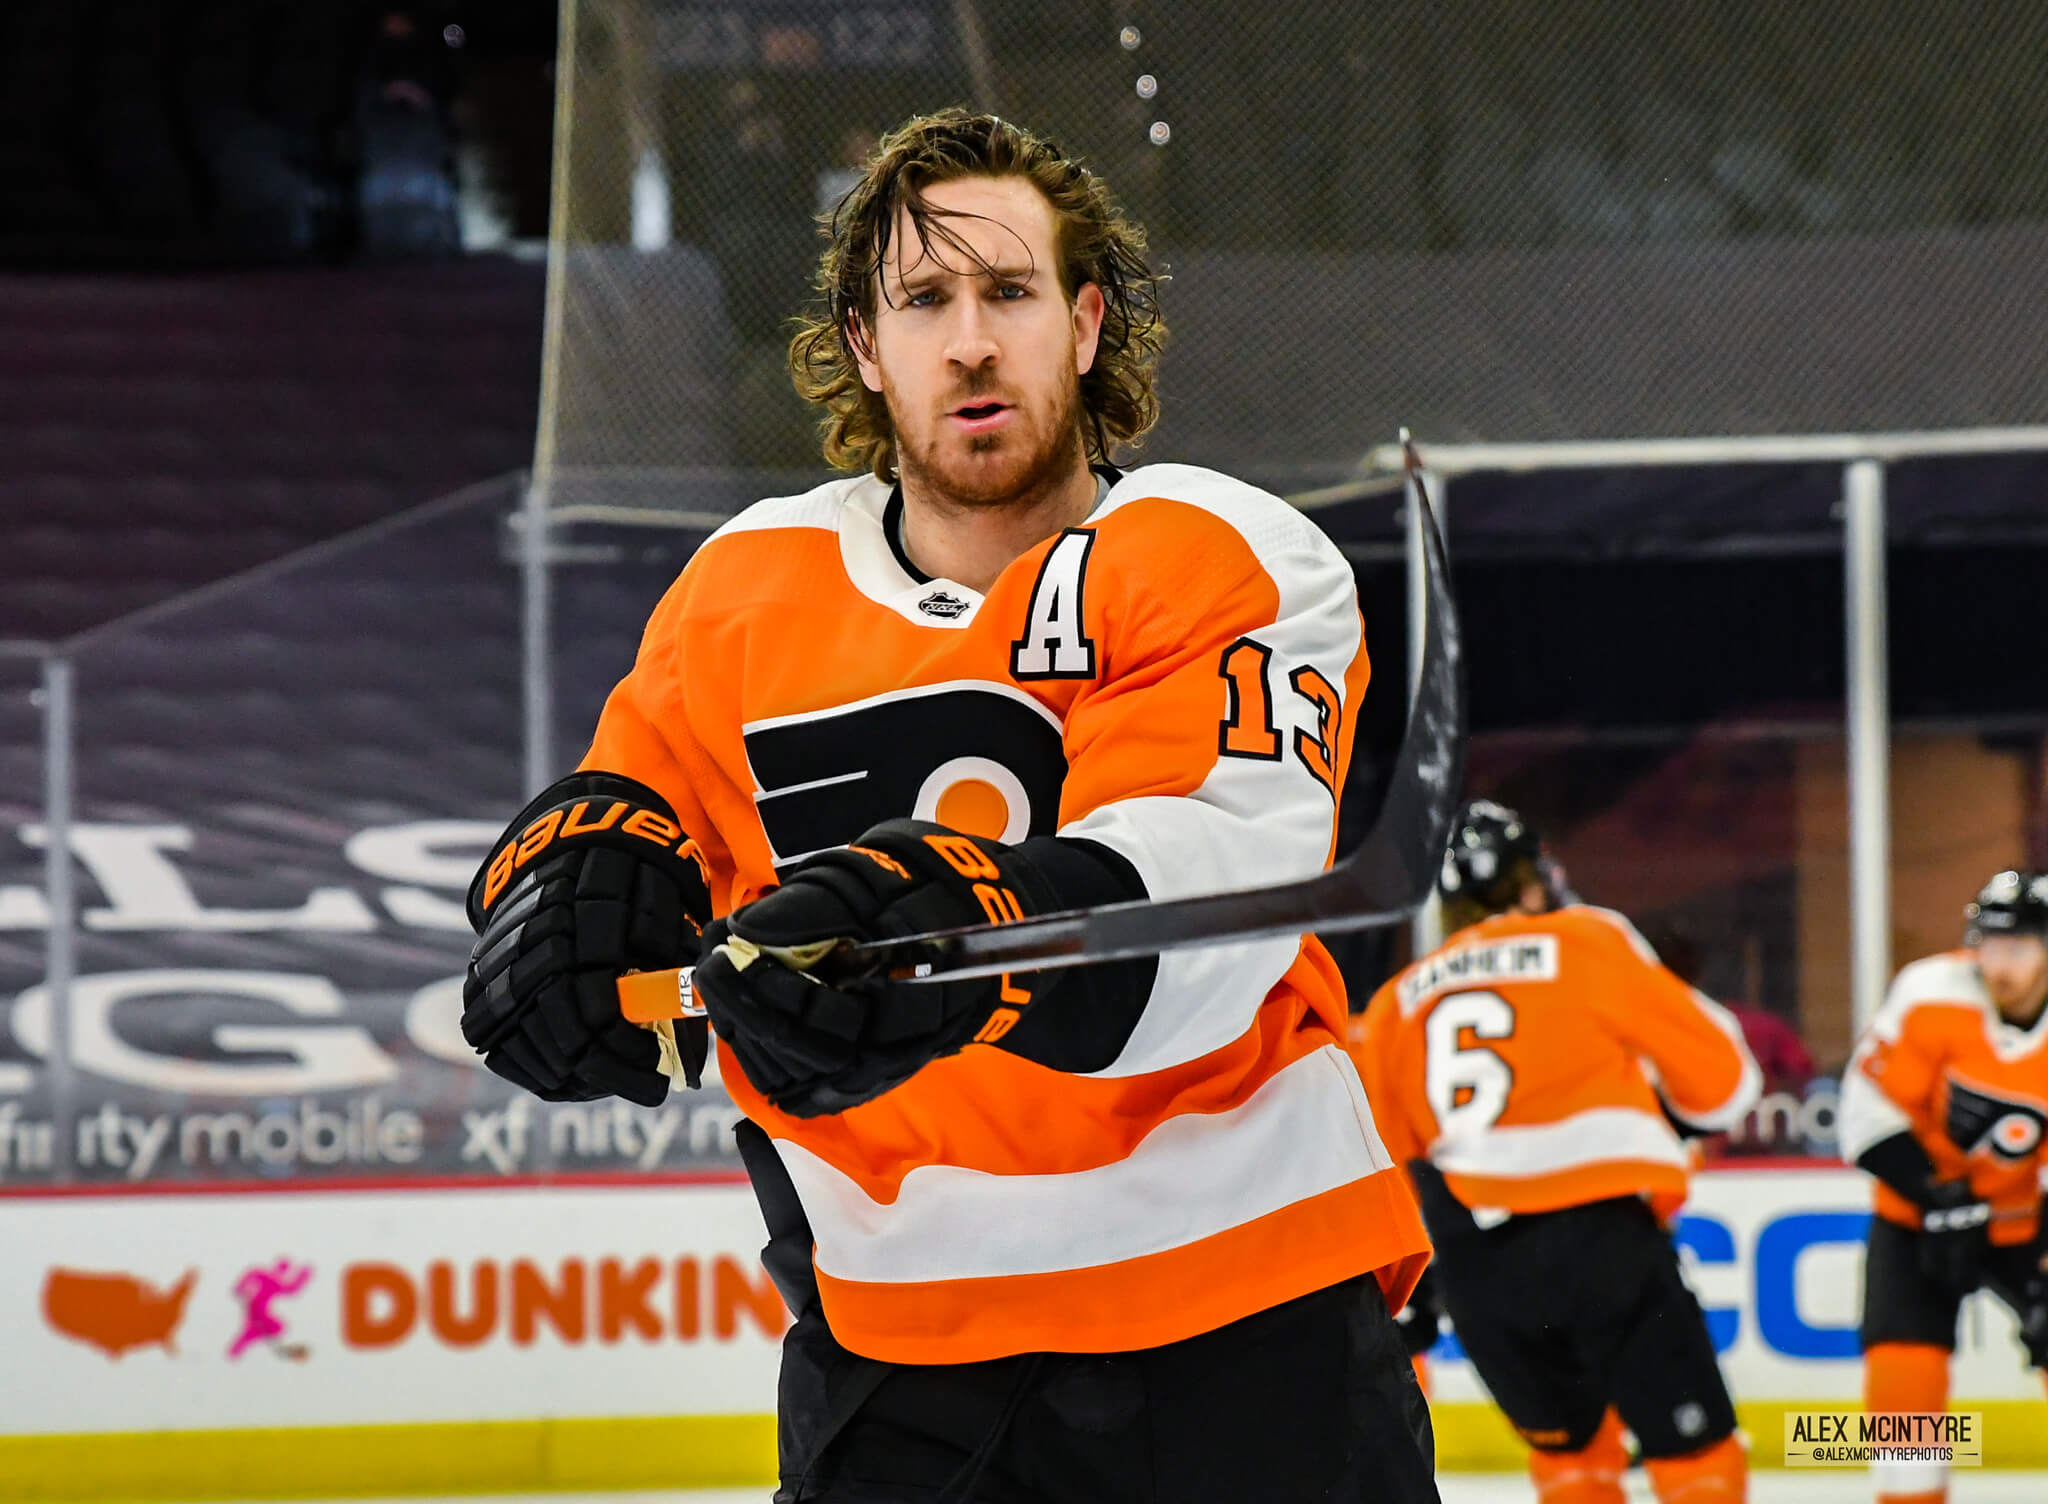 Flyers season preview: Healthy Couturier, Atkinson could provide spark